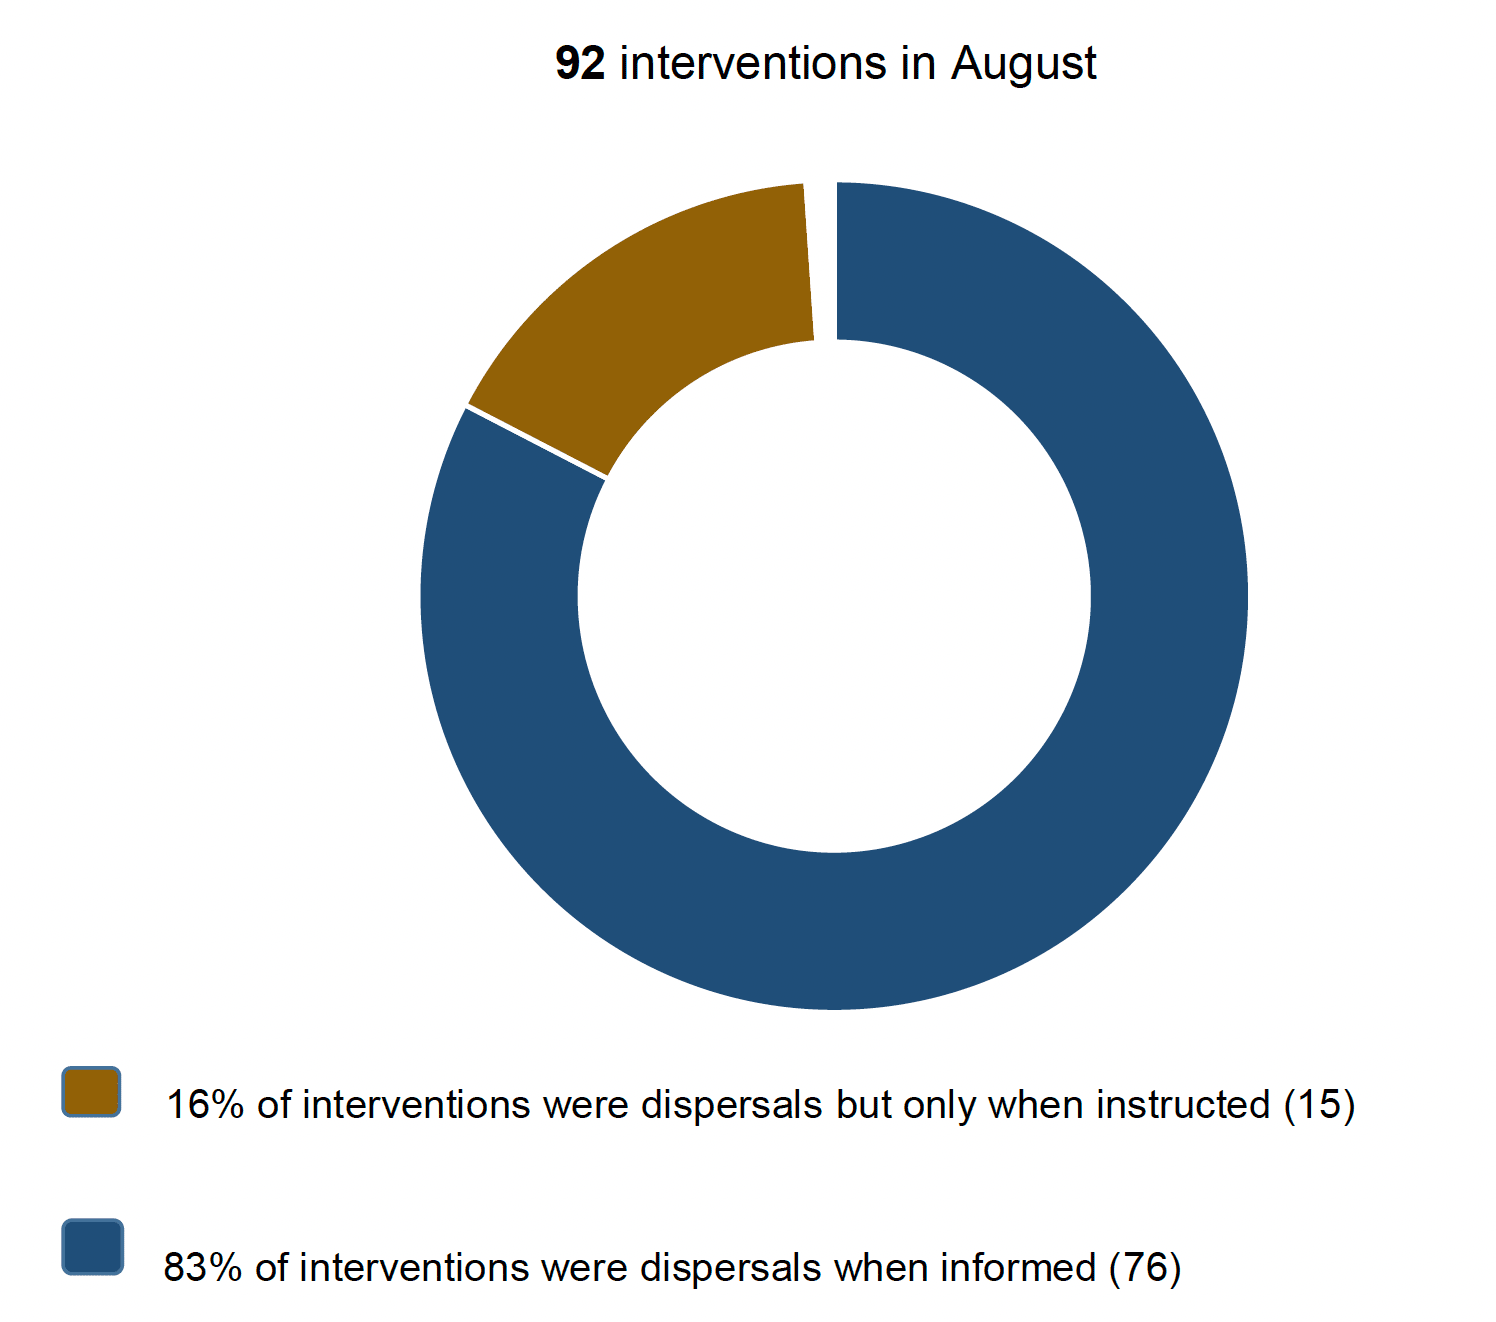 Doughnut chart showing that most interventions in August 2021 were dispersals when informed.